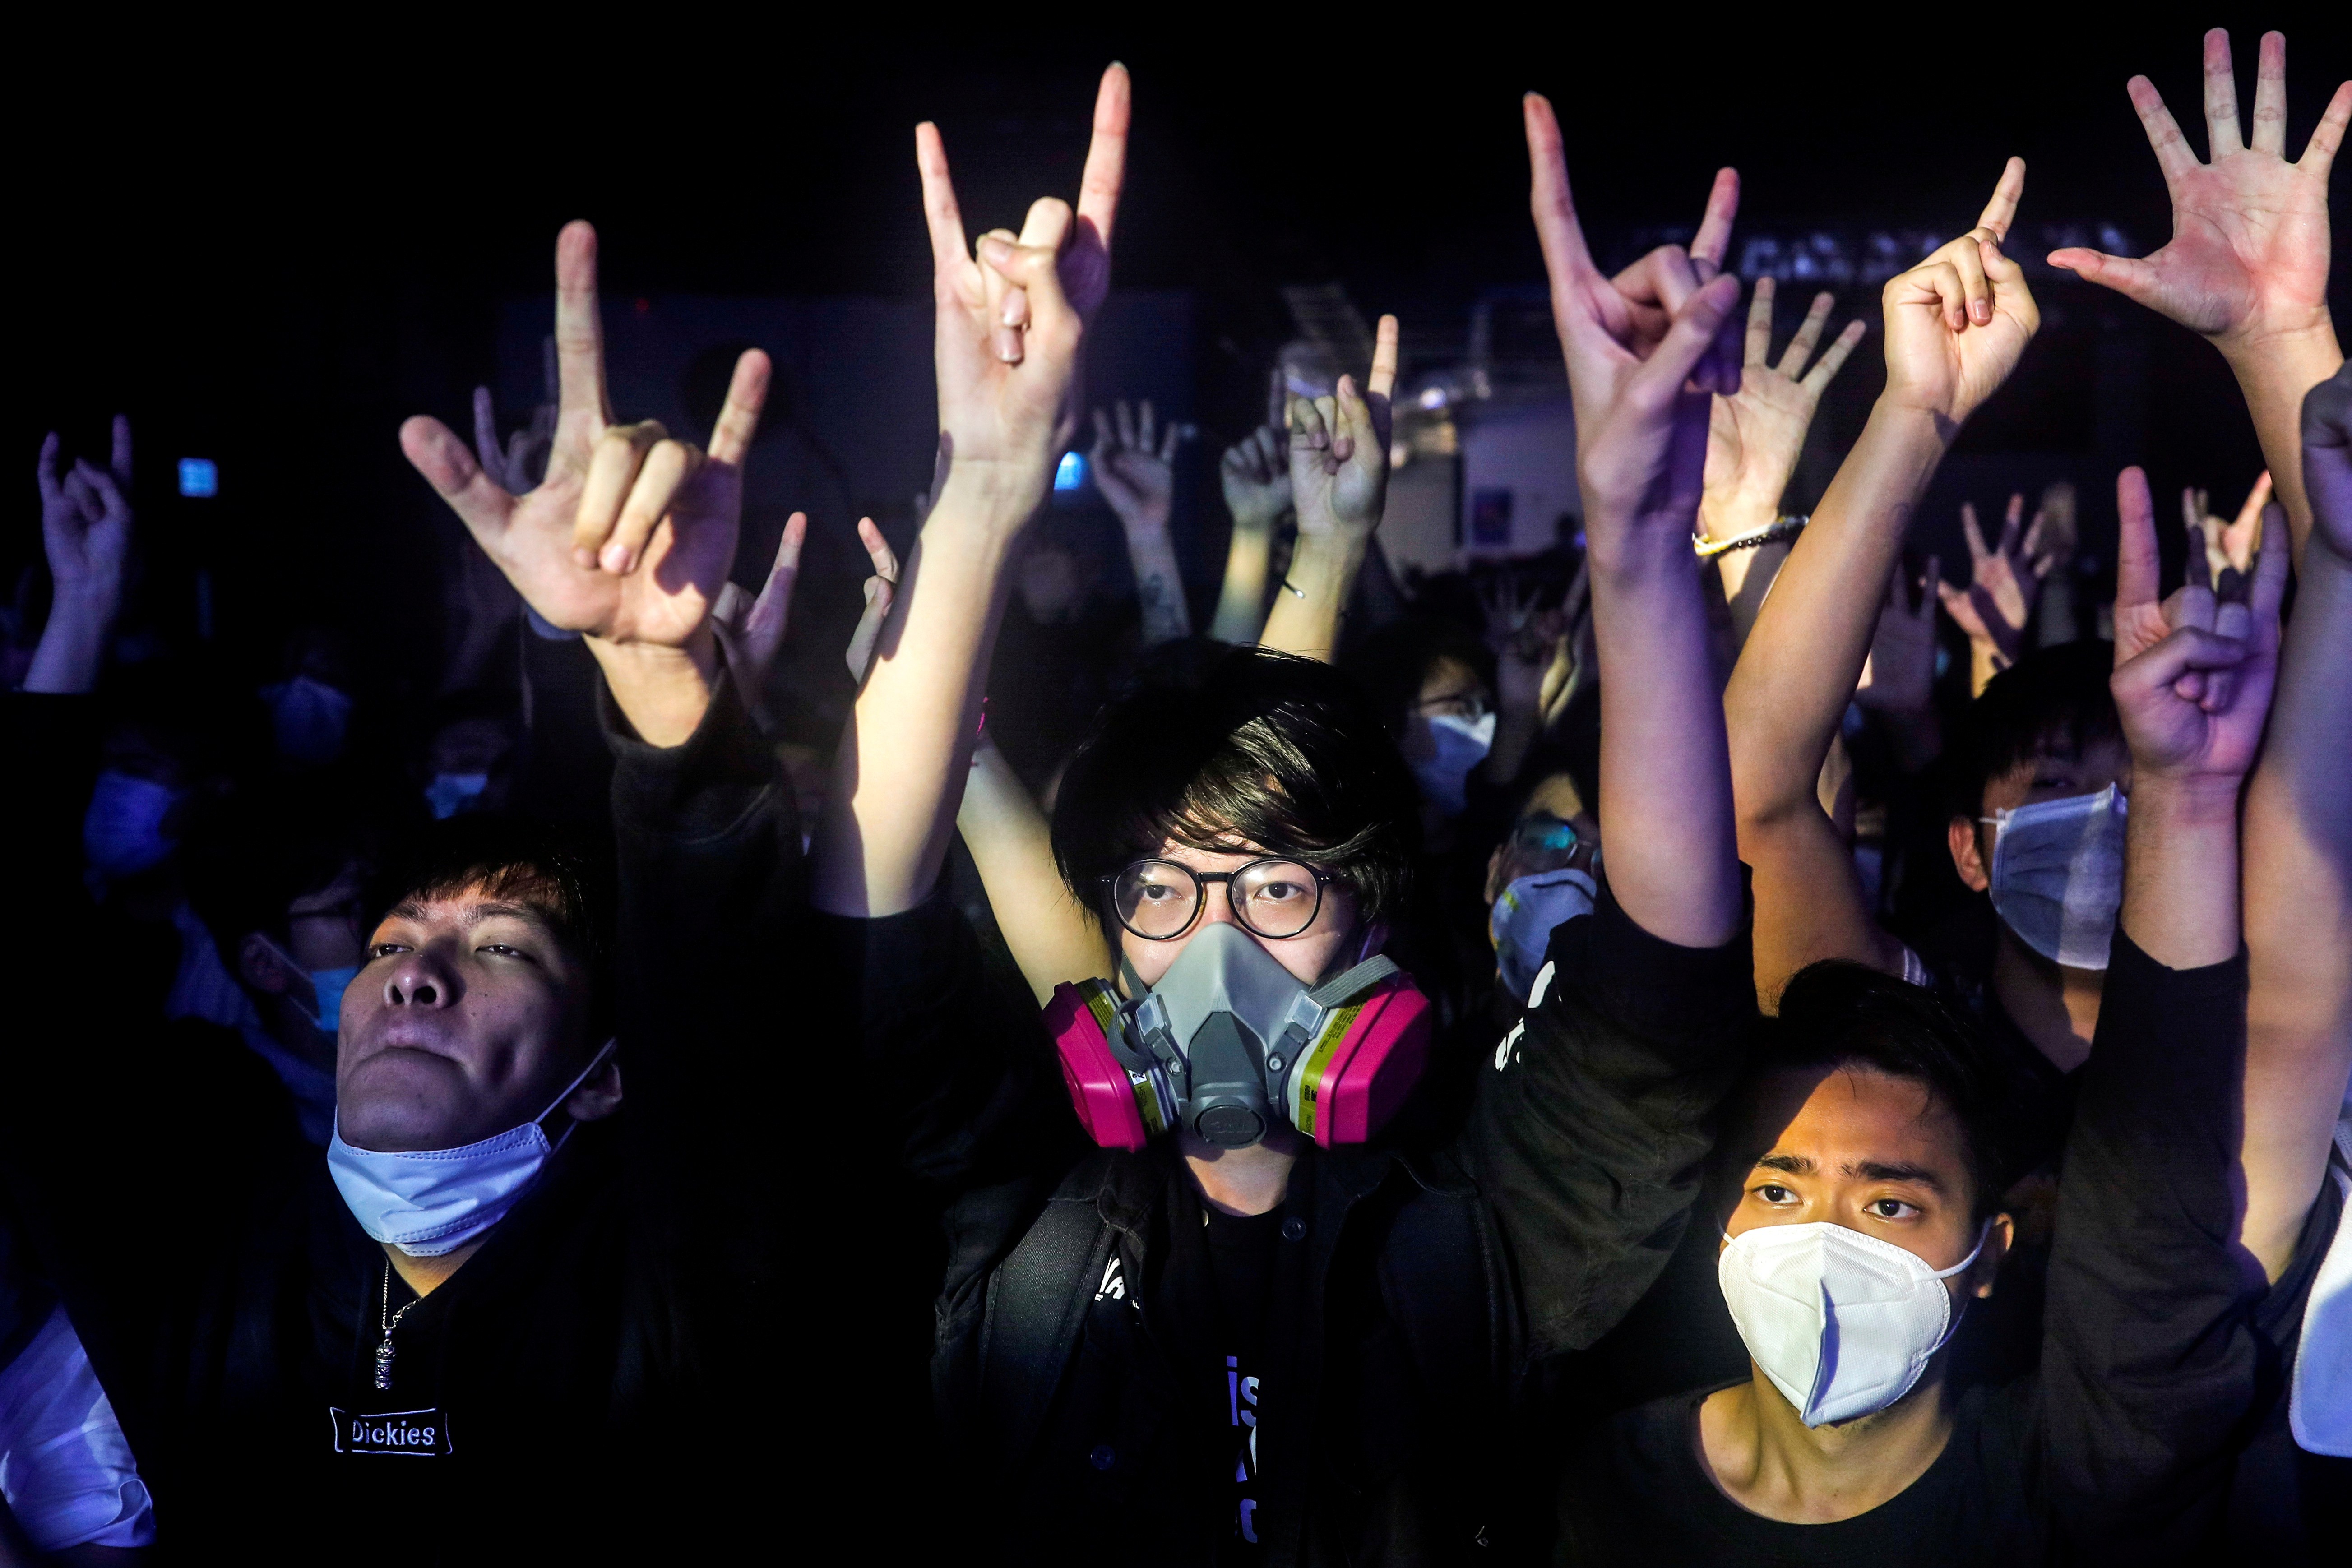 Fans wearing protective masks react while enjoying a band's performance at Hidden Agenda: This Town Needs (TNN). Photo: Reuters